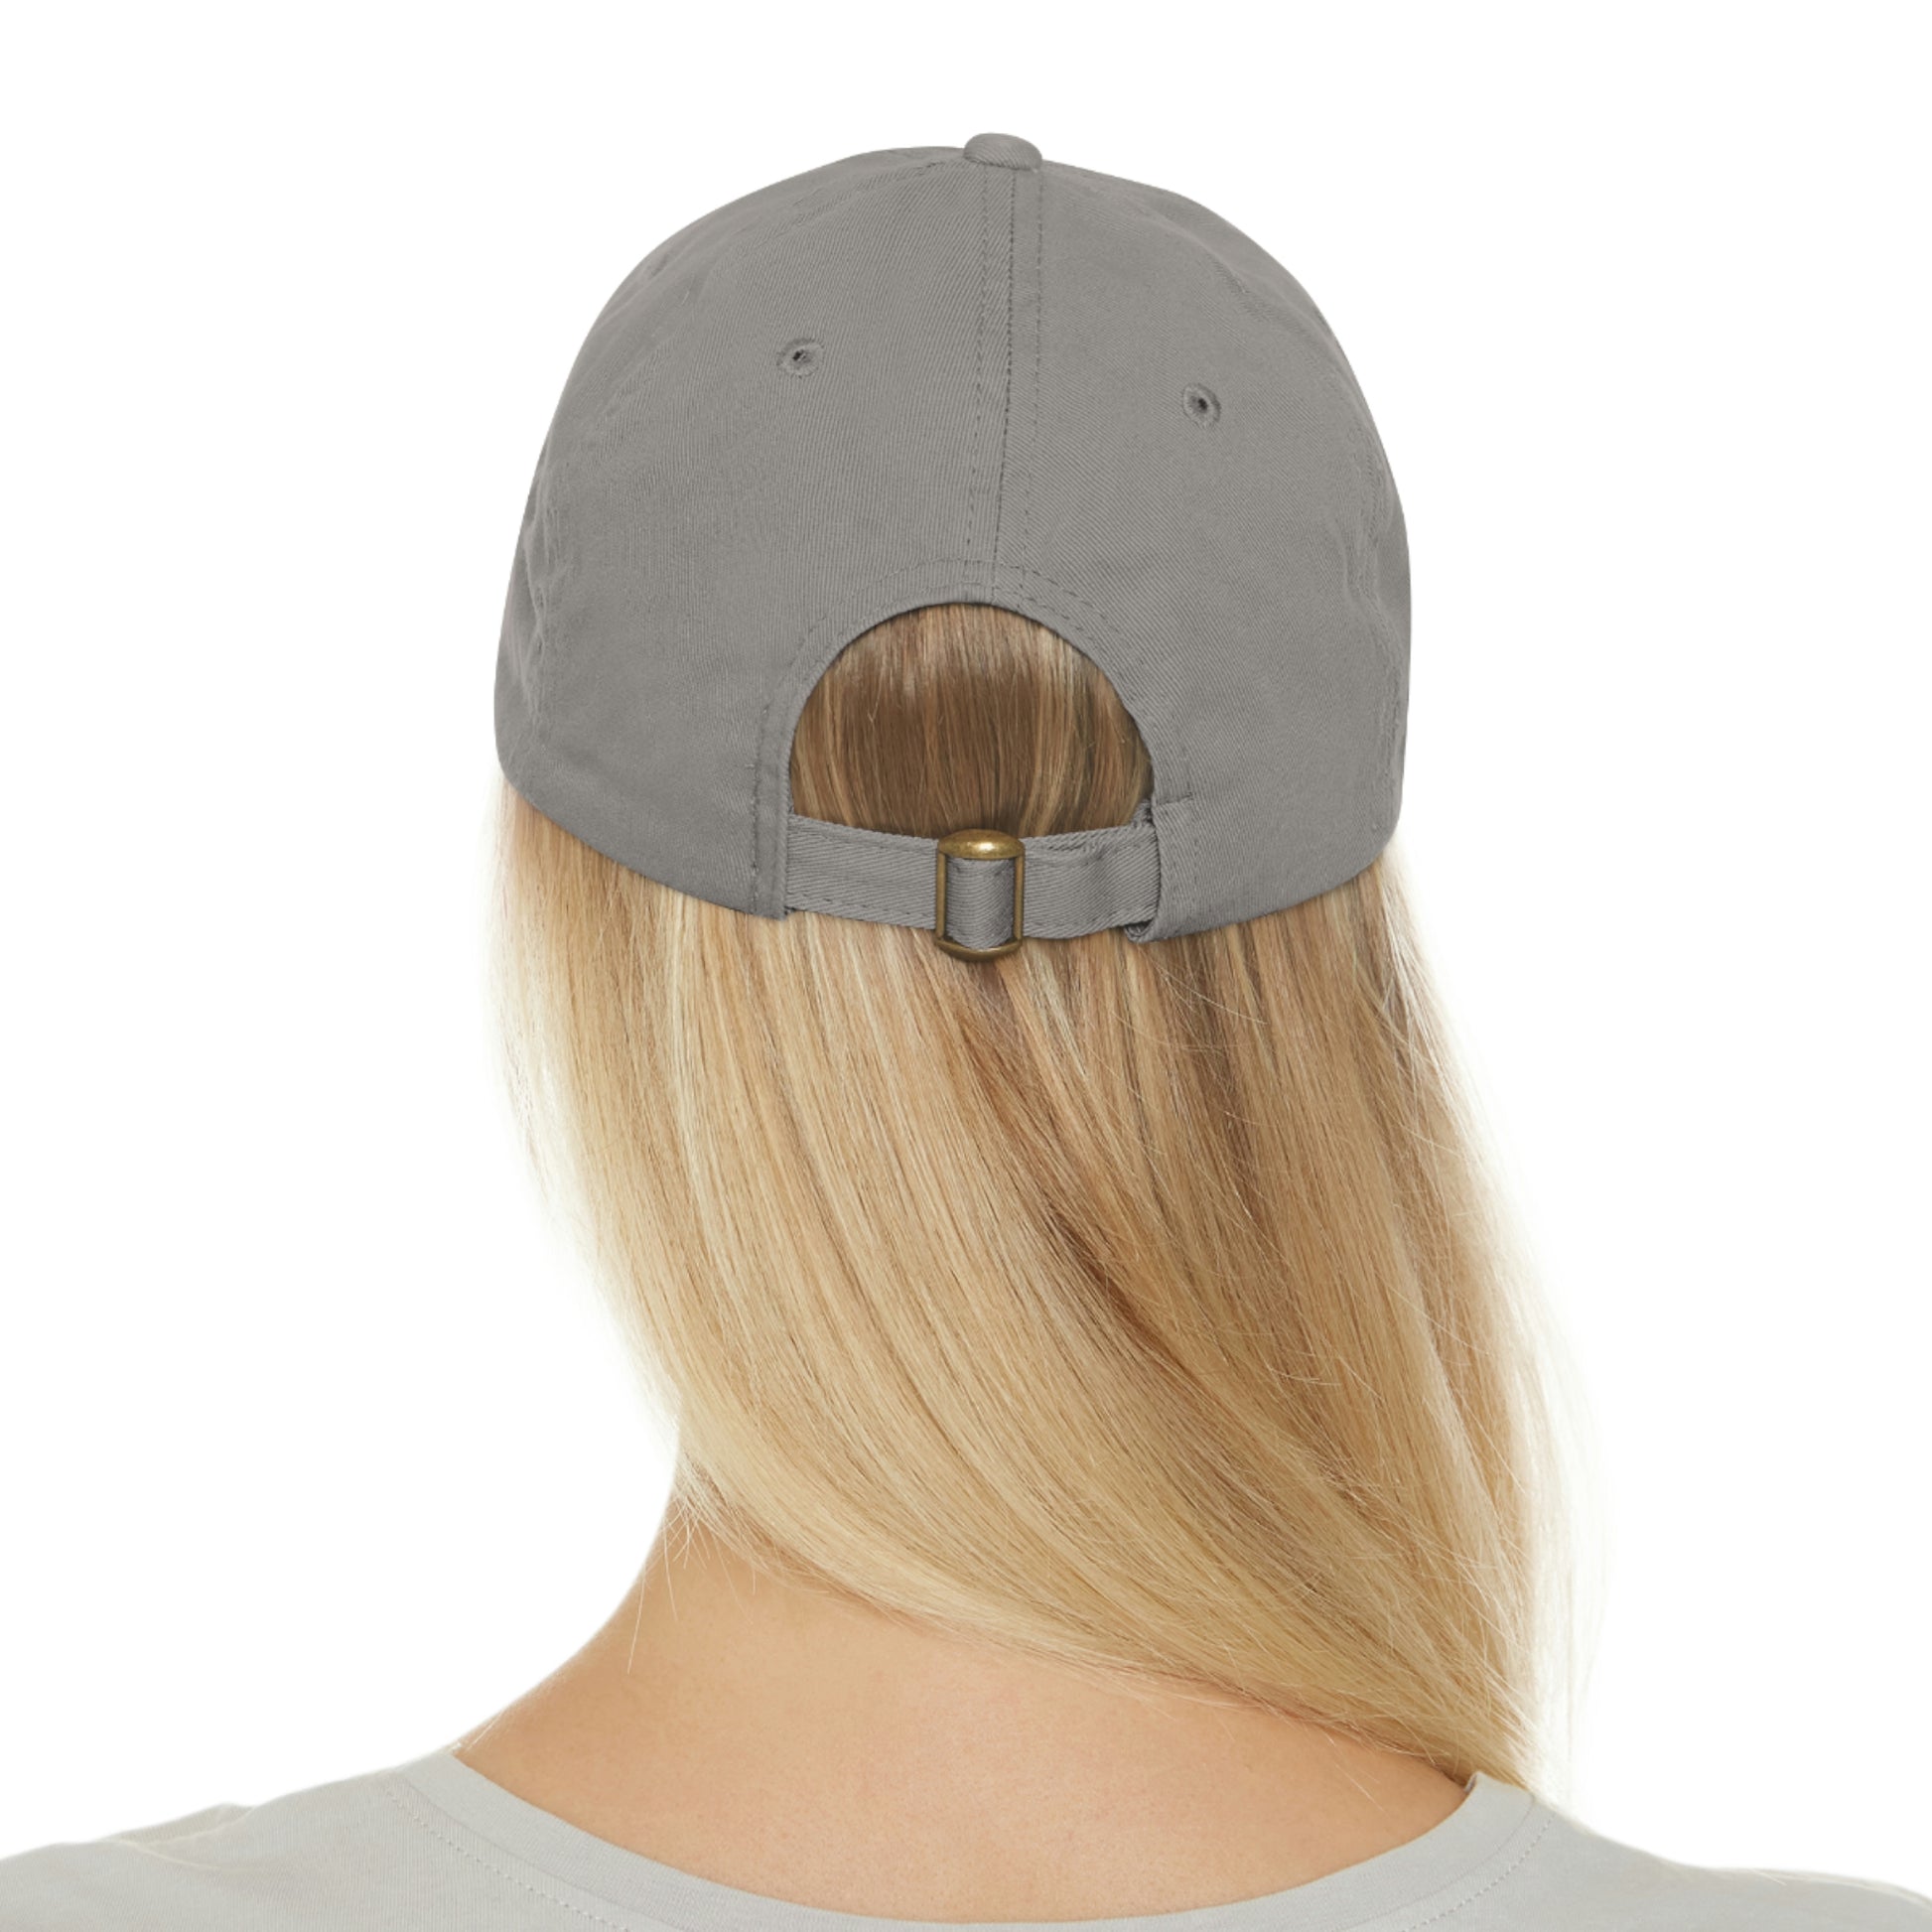 Miami Vibes Cap Grey / Black patch Rectangle One size